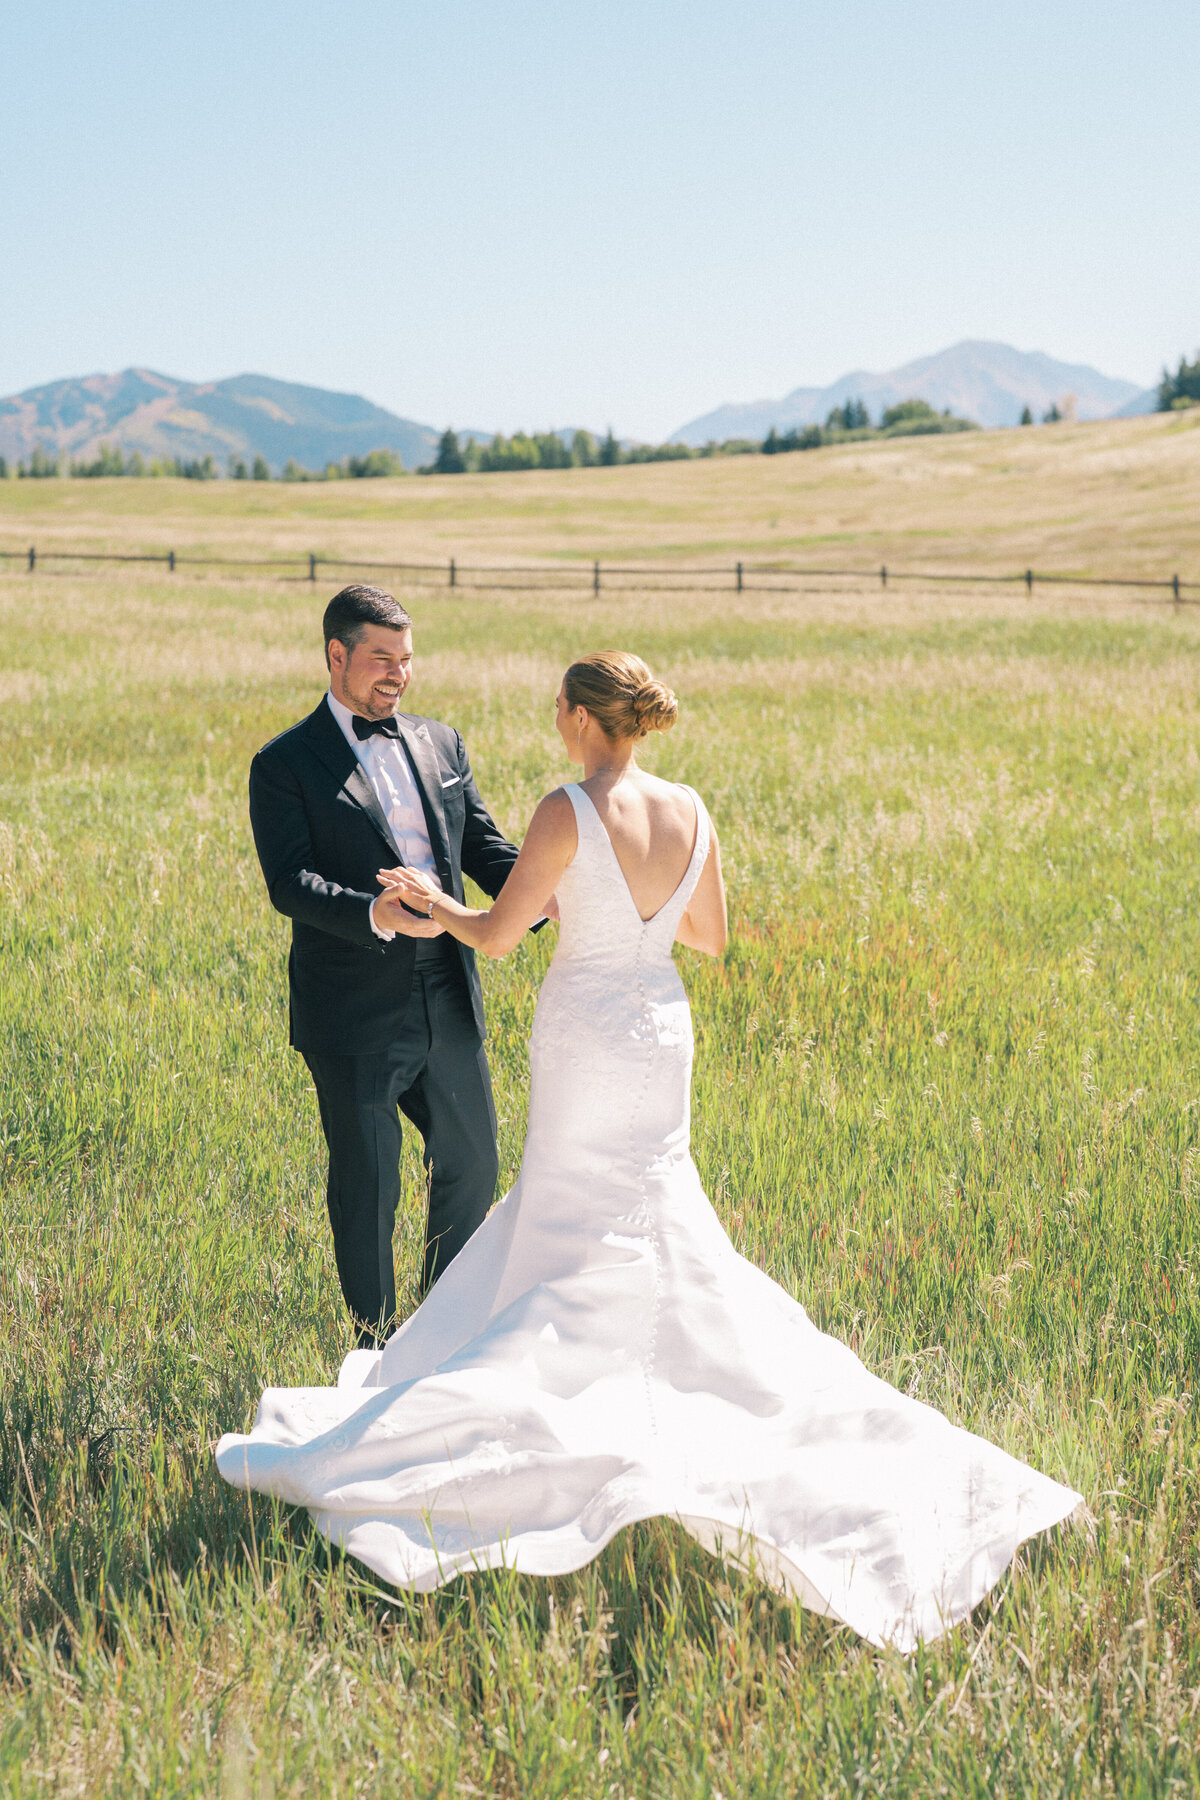 Couple's first look at Colorado wedding